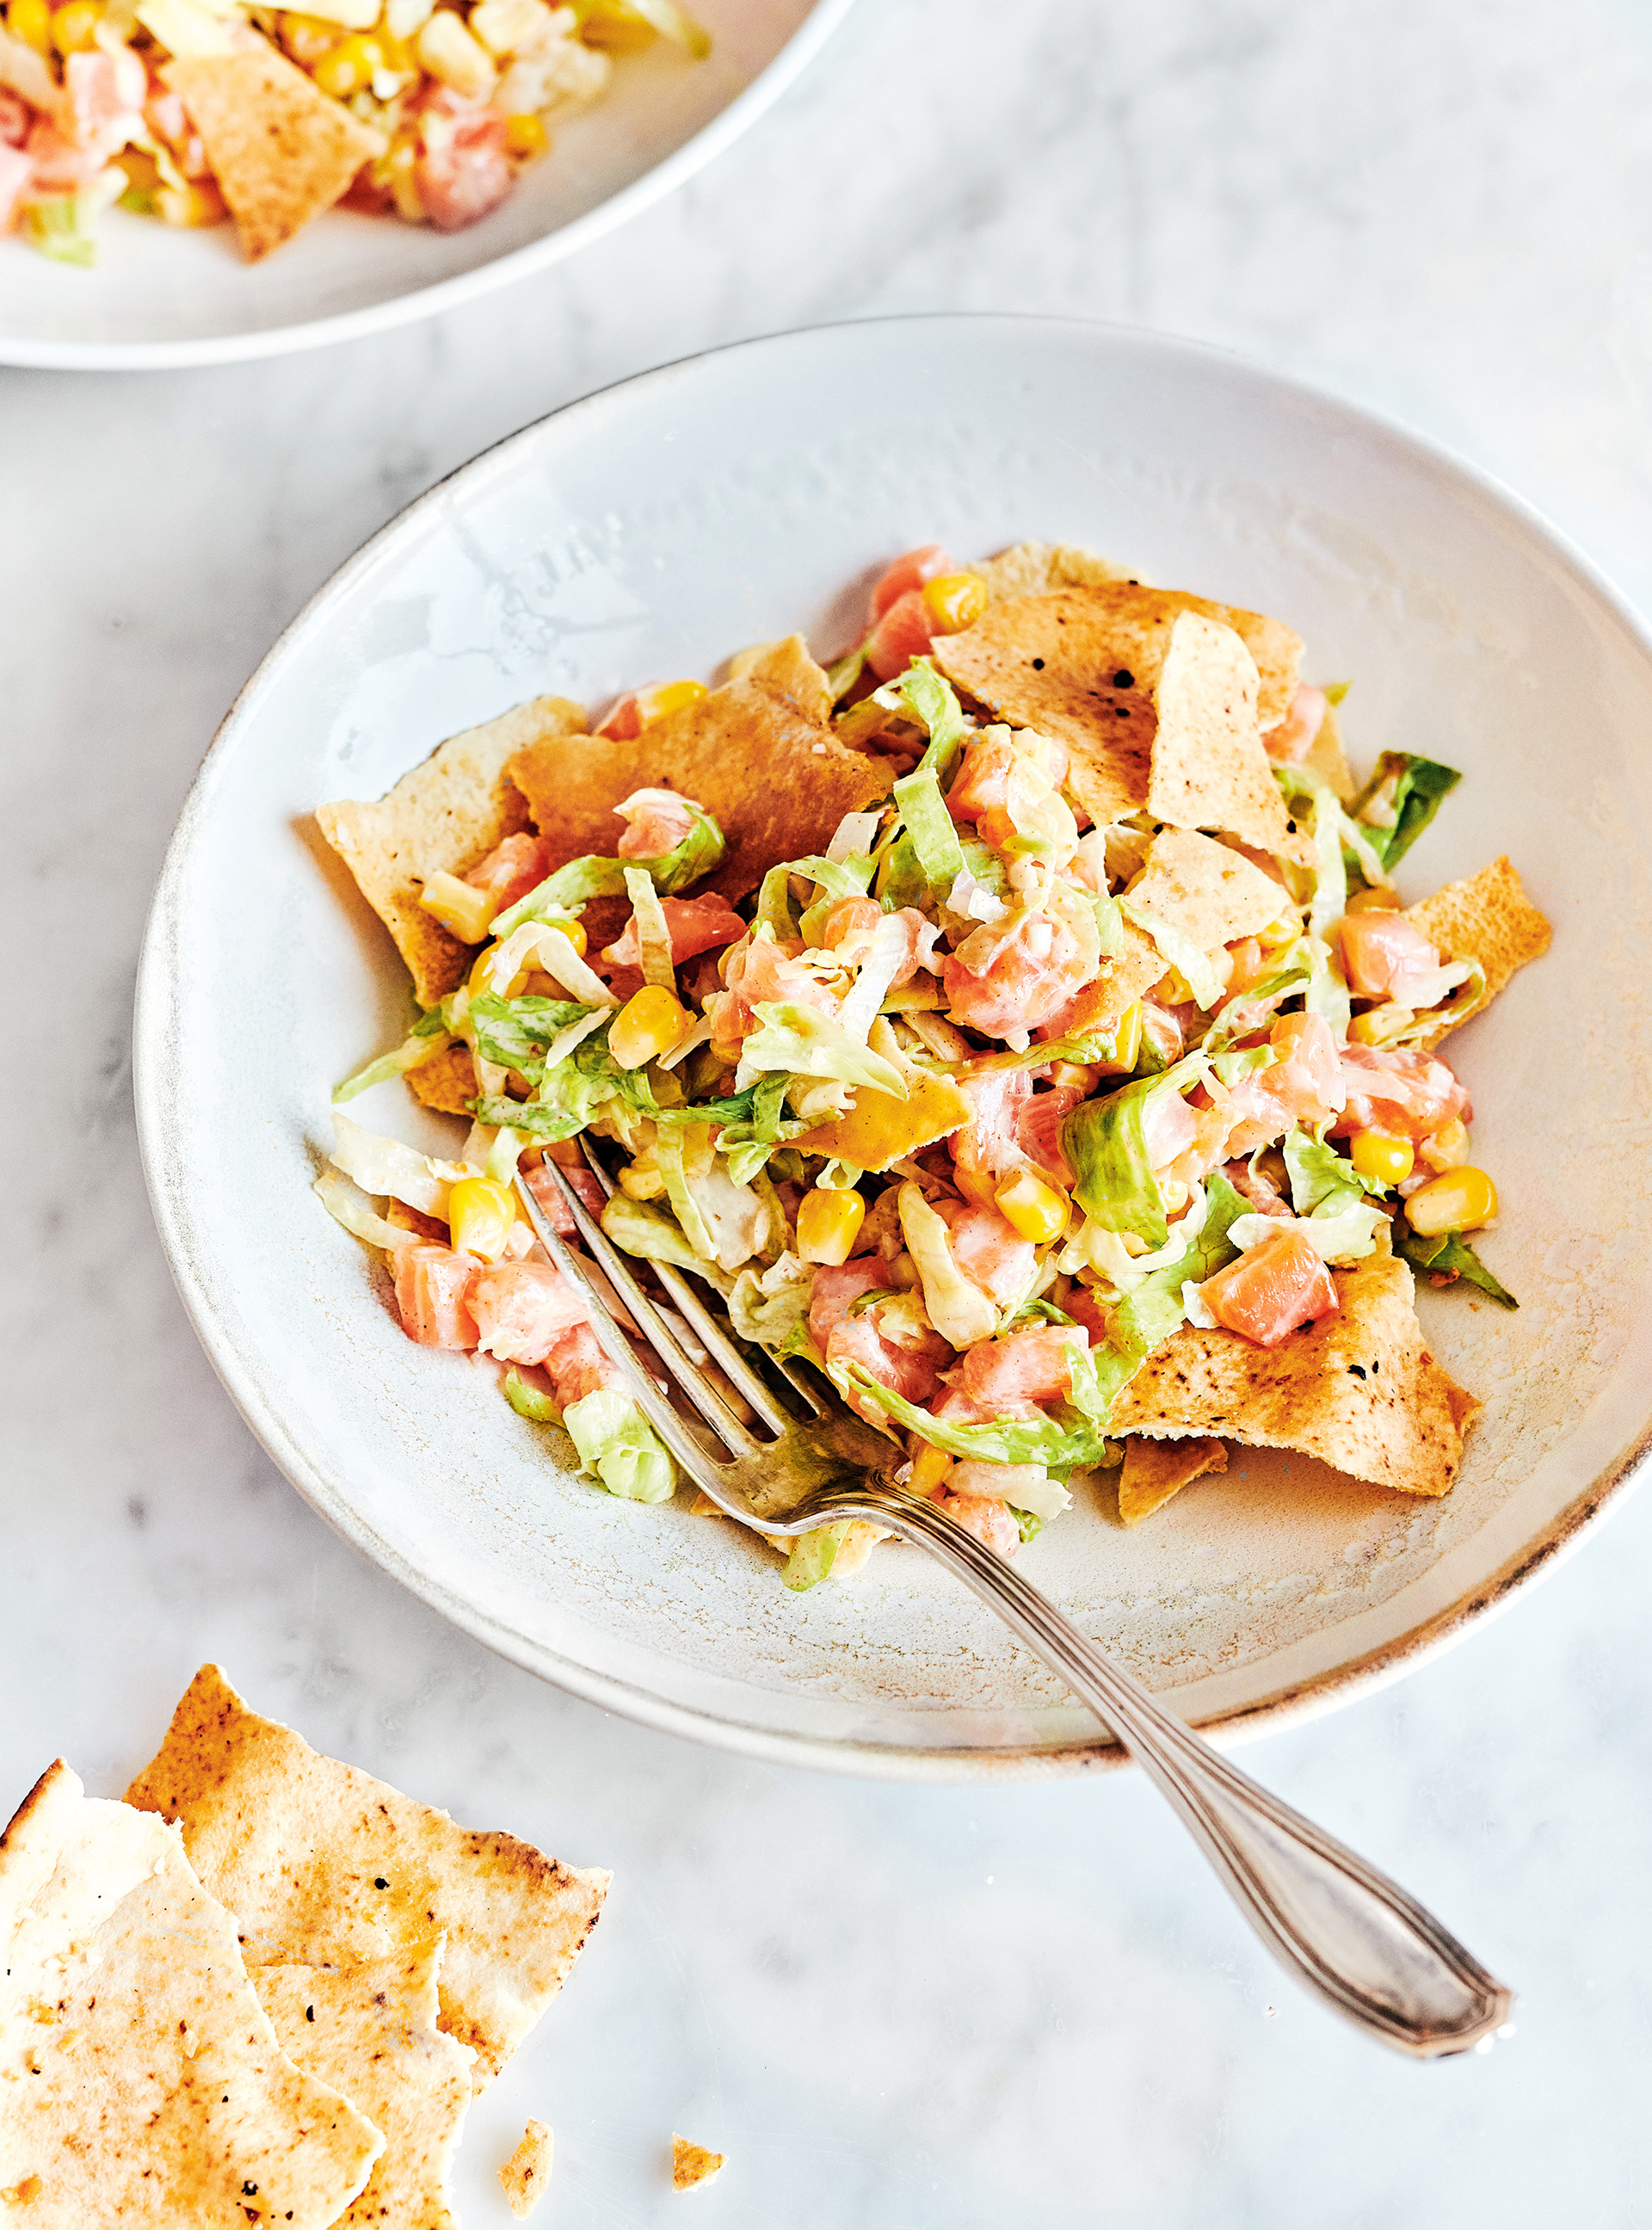 Spicy Salmon Tartare and Corn Salad with Pita Chips